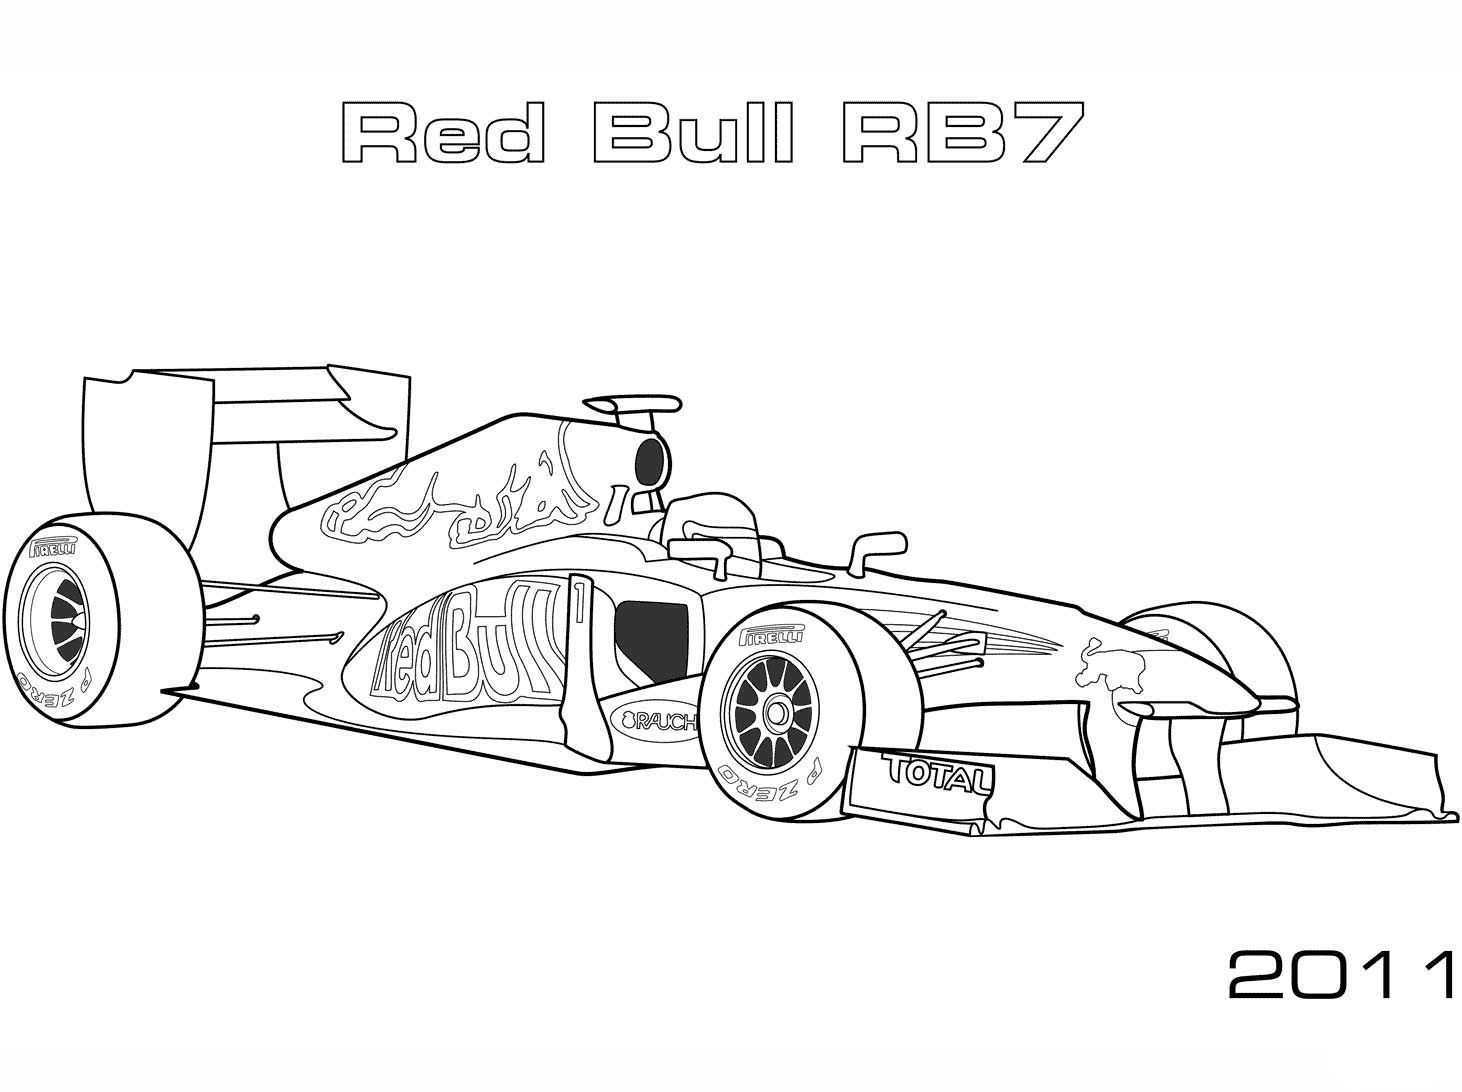 Red Bull Rb7 Formula 1 Car Coloring Page Cars Coloring Pages Coloring Pages Cute Colo